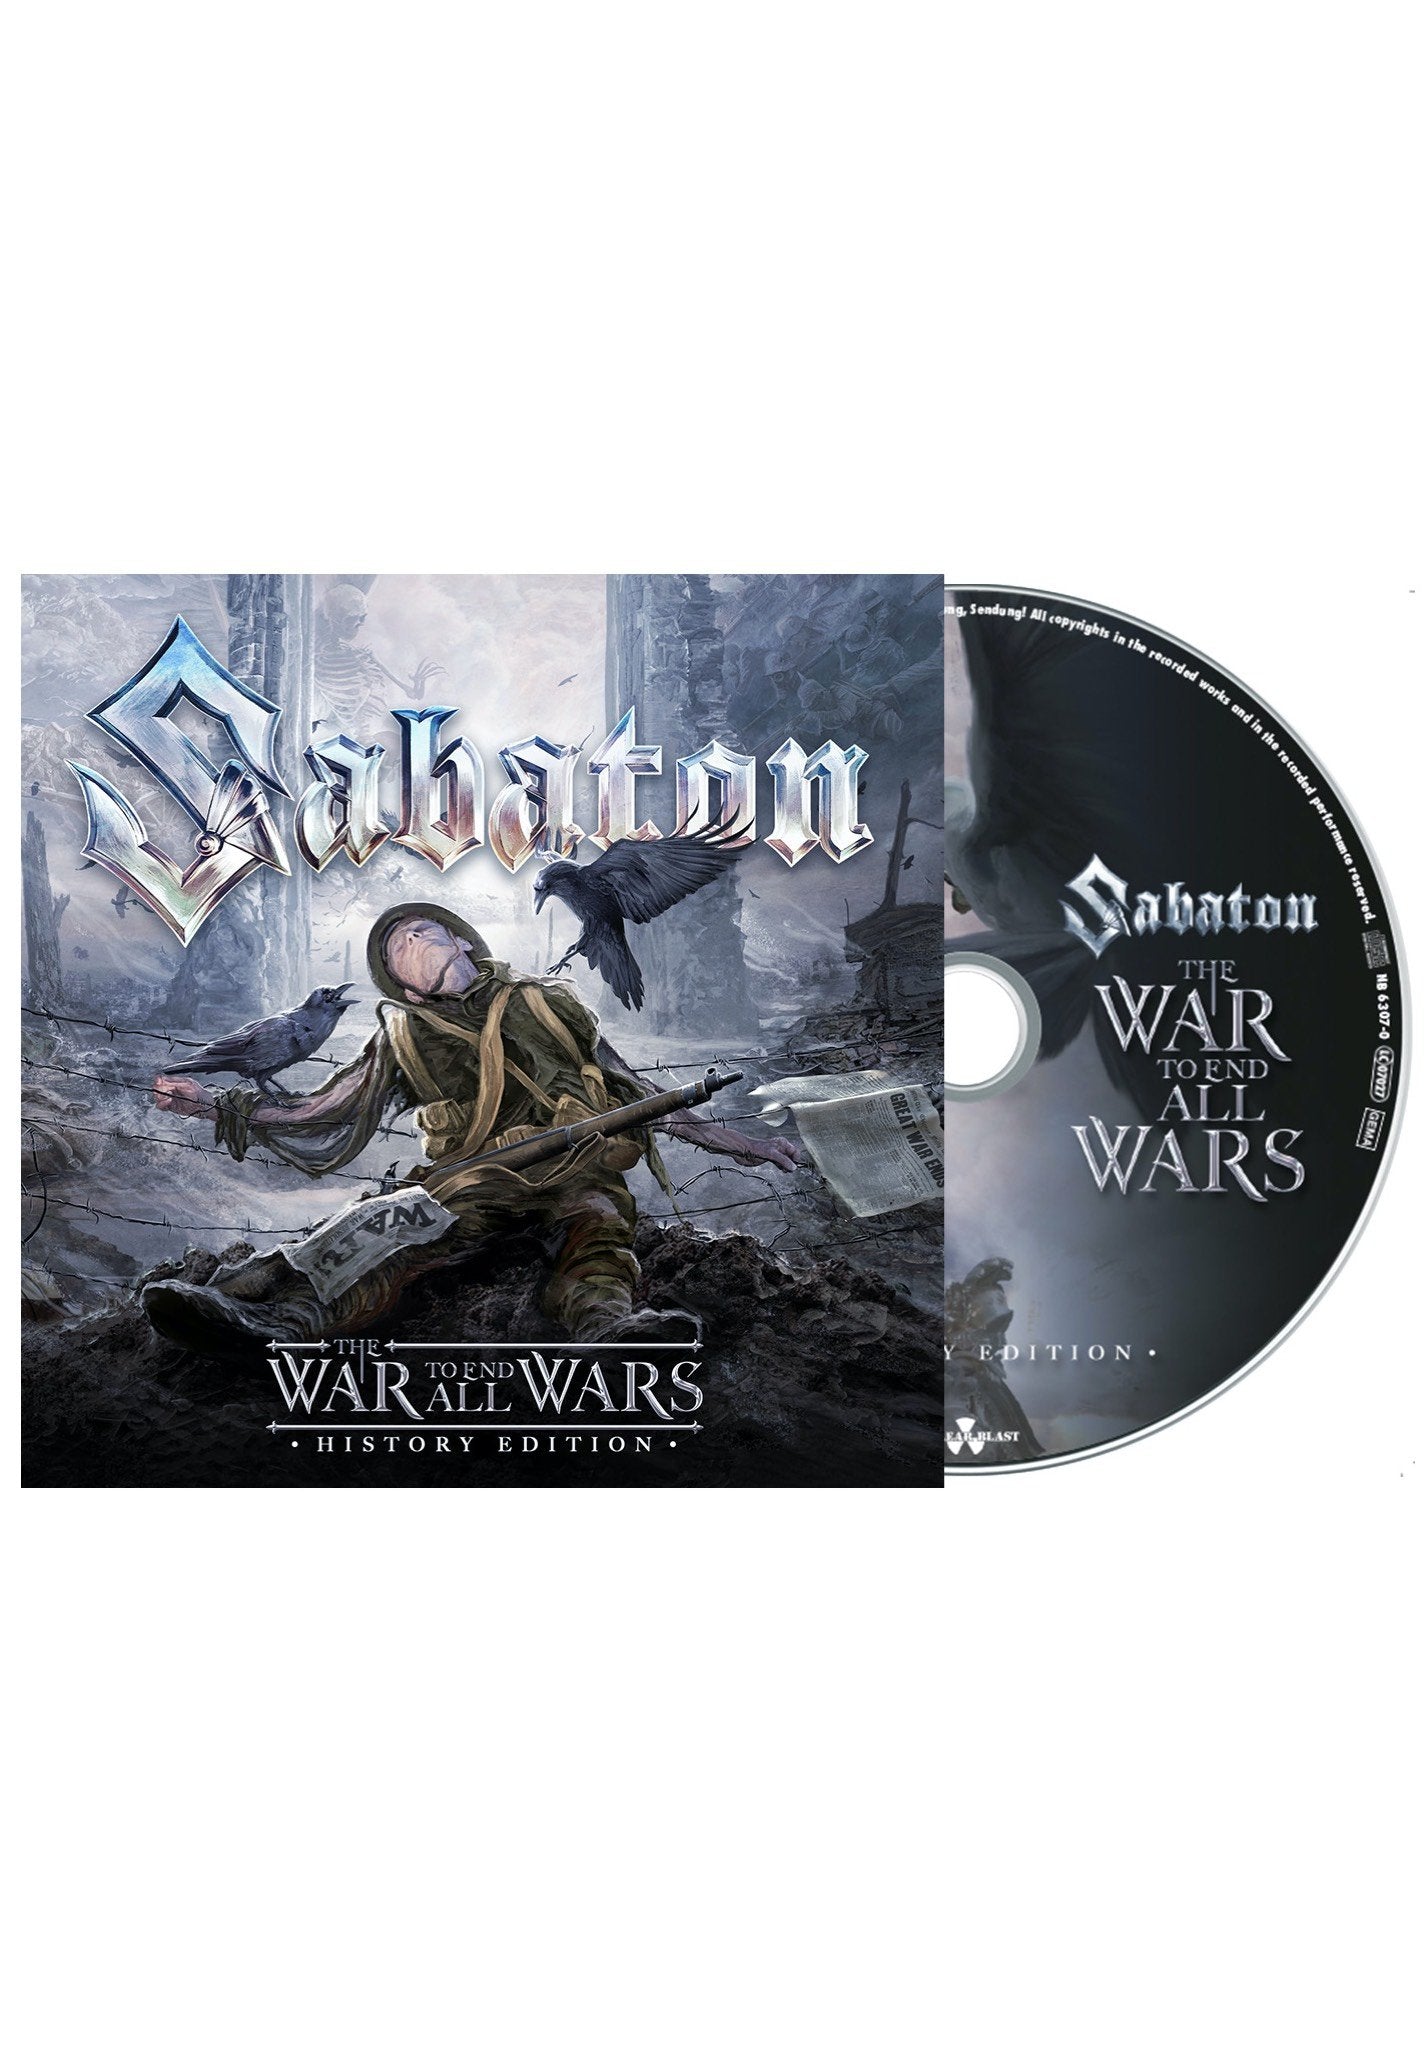 Sabaton - The War To End All Wars Ltd. History Edition - Digibook CD